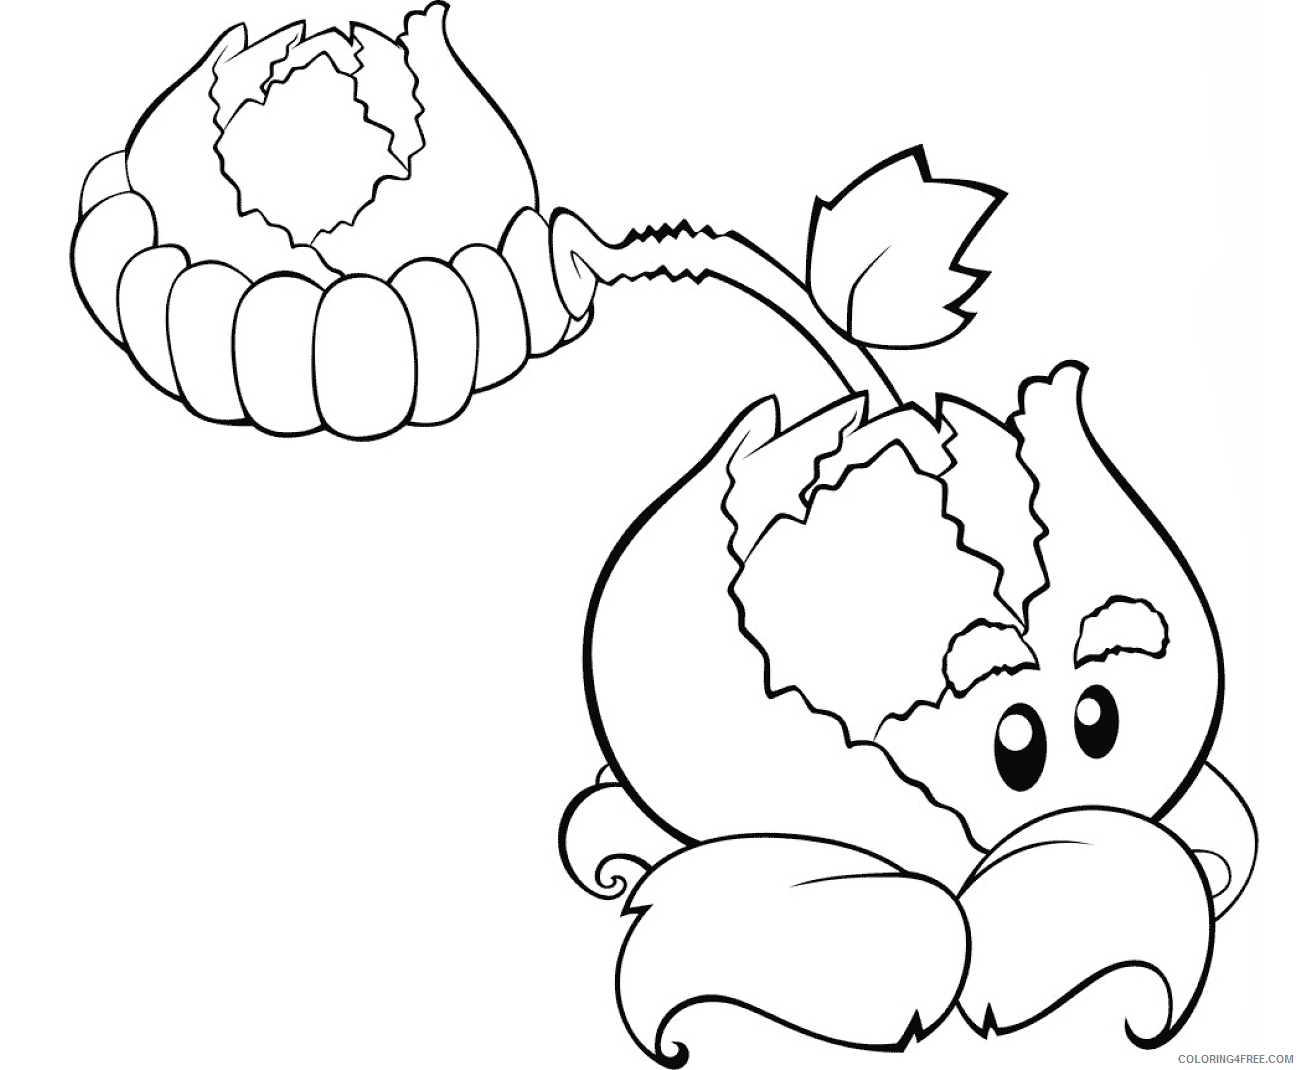 Cabbage Coloring Pages Vegetables Food cabbage pult Printable 2021 502 Coloring4free